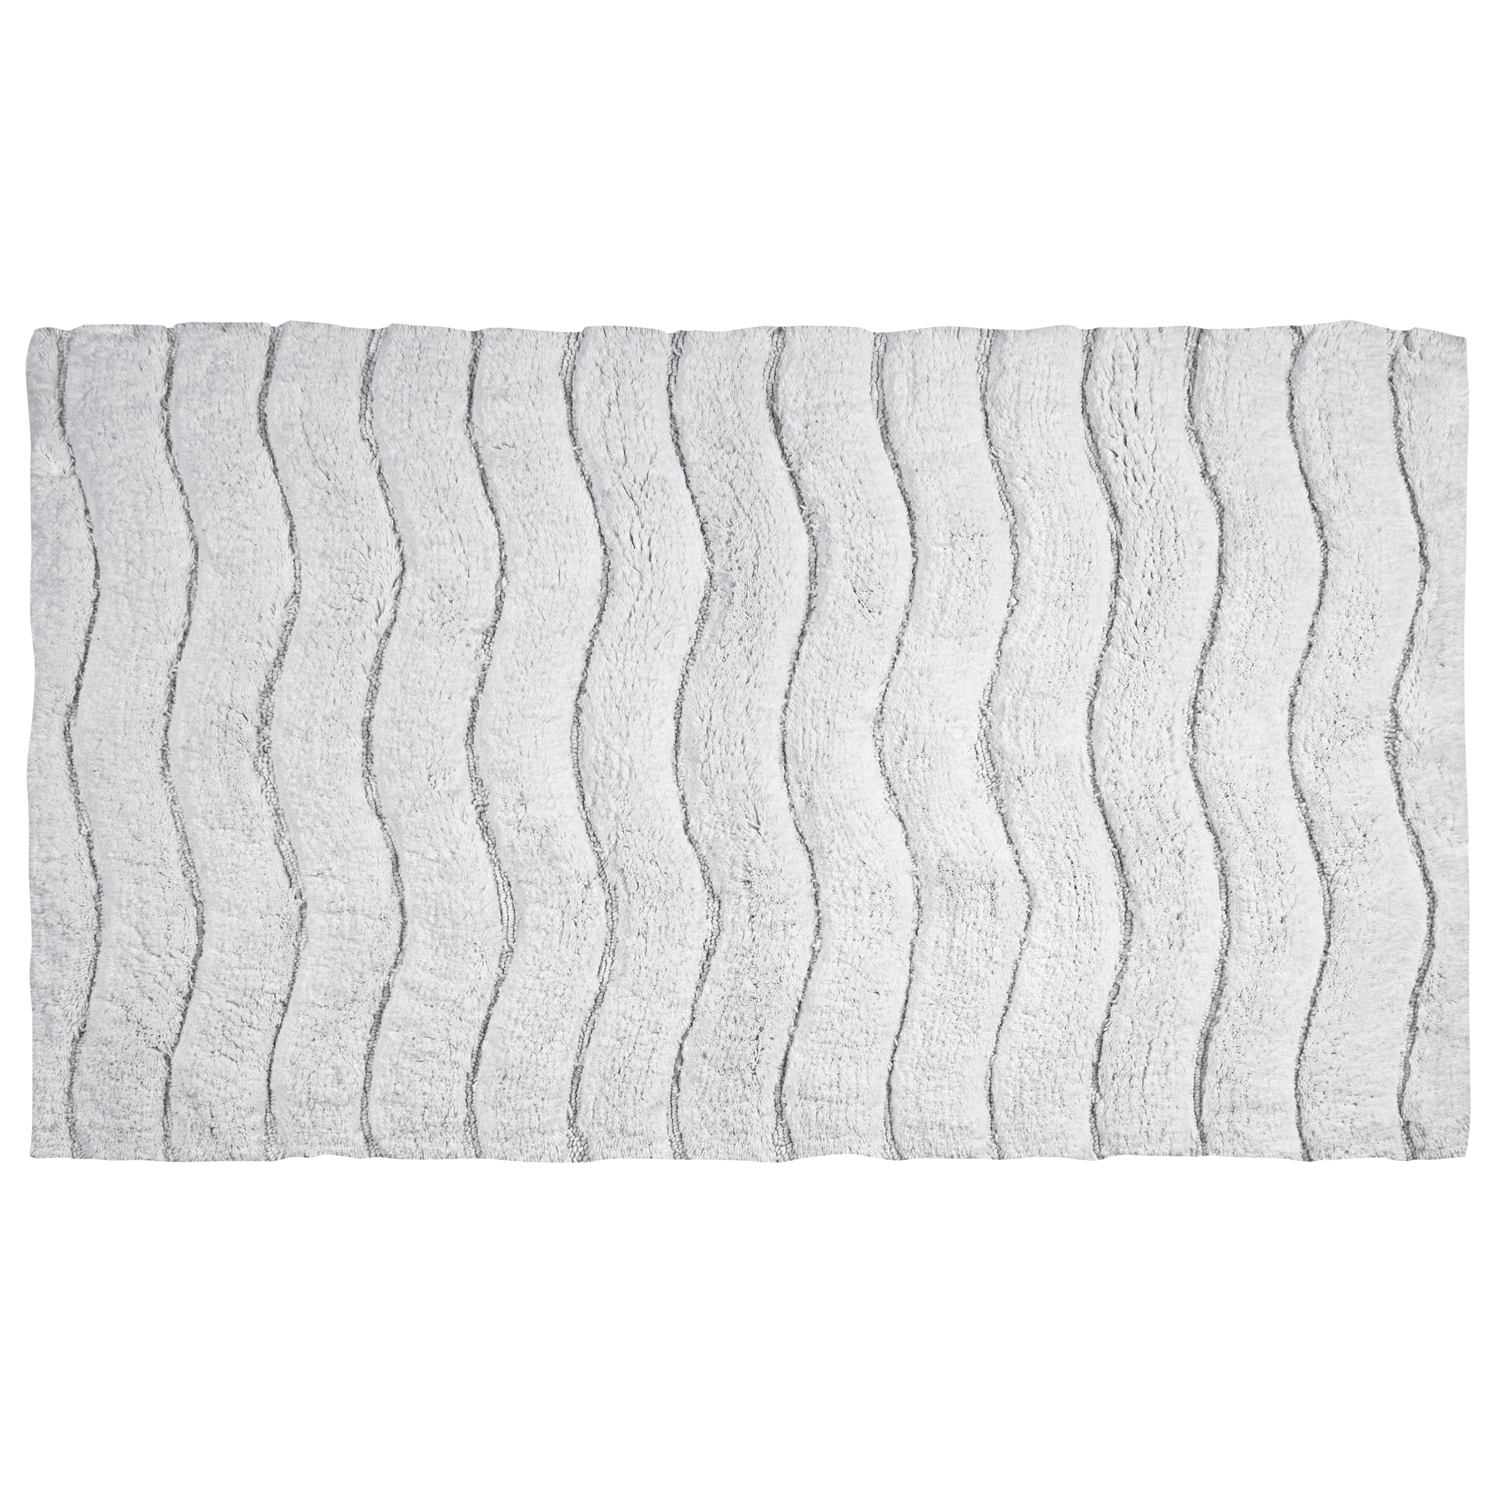 Better Trends Indulgence Tufted Bath Mat Rug 100% Ring Spun Cotton, 27" x 45" Rectangle, White - image 2 of 4